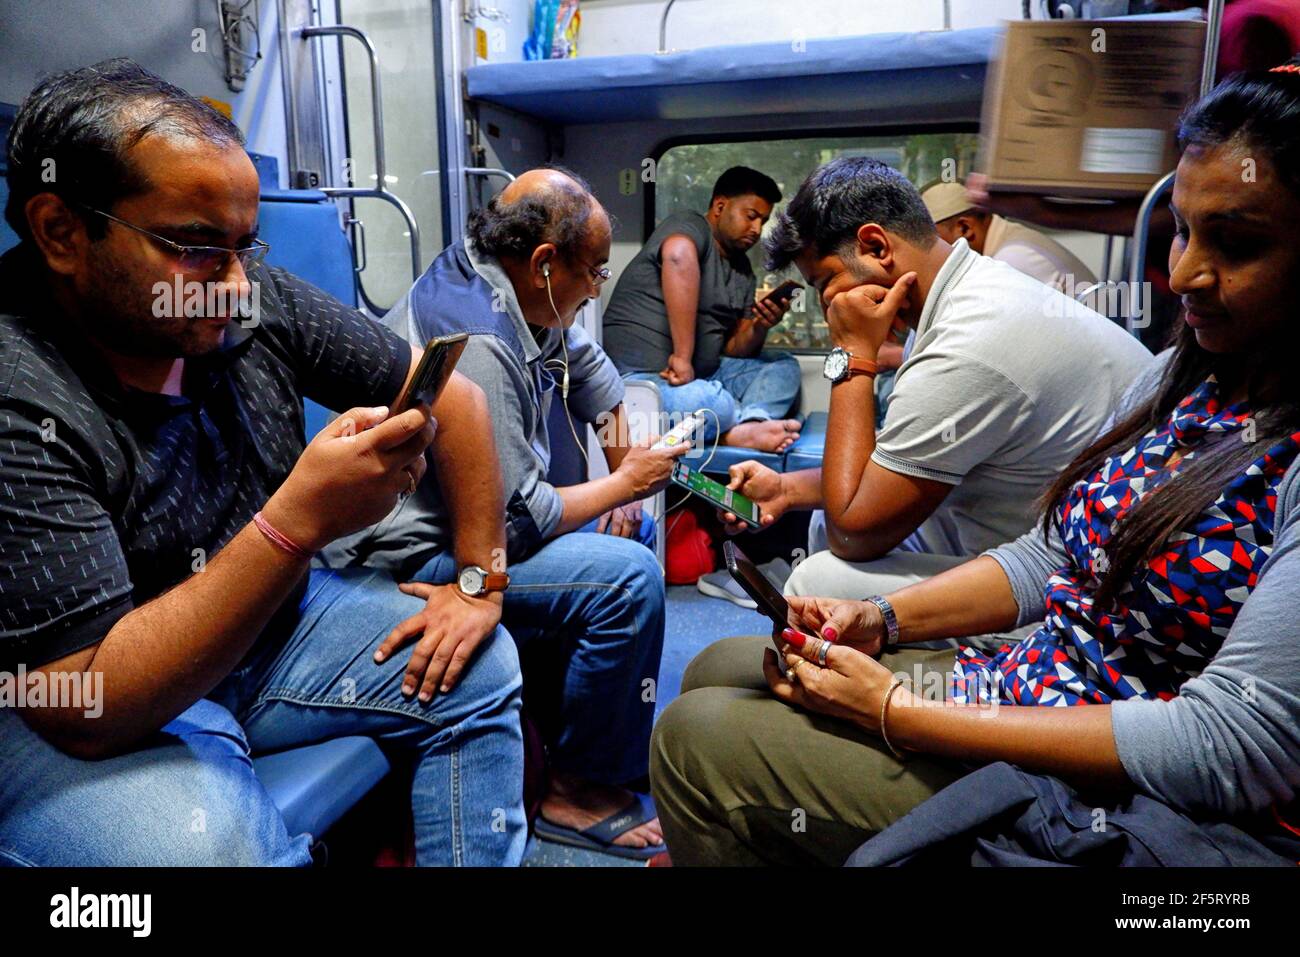 Delhi, India. 21st Mar, 2021. Passengers are seen browsing their Mobile Phones inside a Railway Coach of Rajdhani Express without wearing any protective gears.India has recorded 61187 new Covid 19 cases on March 27, 2021 where the government plans to re inforce lockdown/containment measures from April 2021 onwards to tackle the Second wave of the Covid 19 pandemic. (Photo by Avishek Das/SOPA Images/Sipa USA) Credit: Sipa USA/Alamy Live News Stock Photo